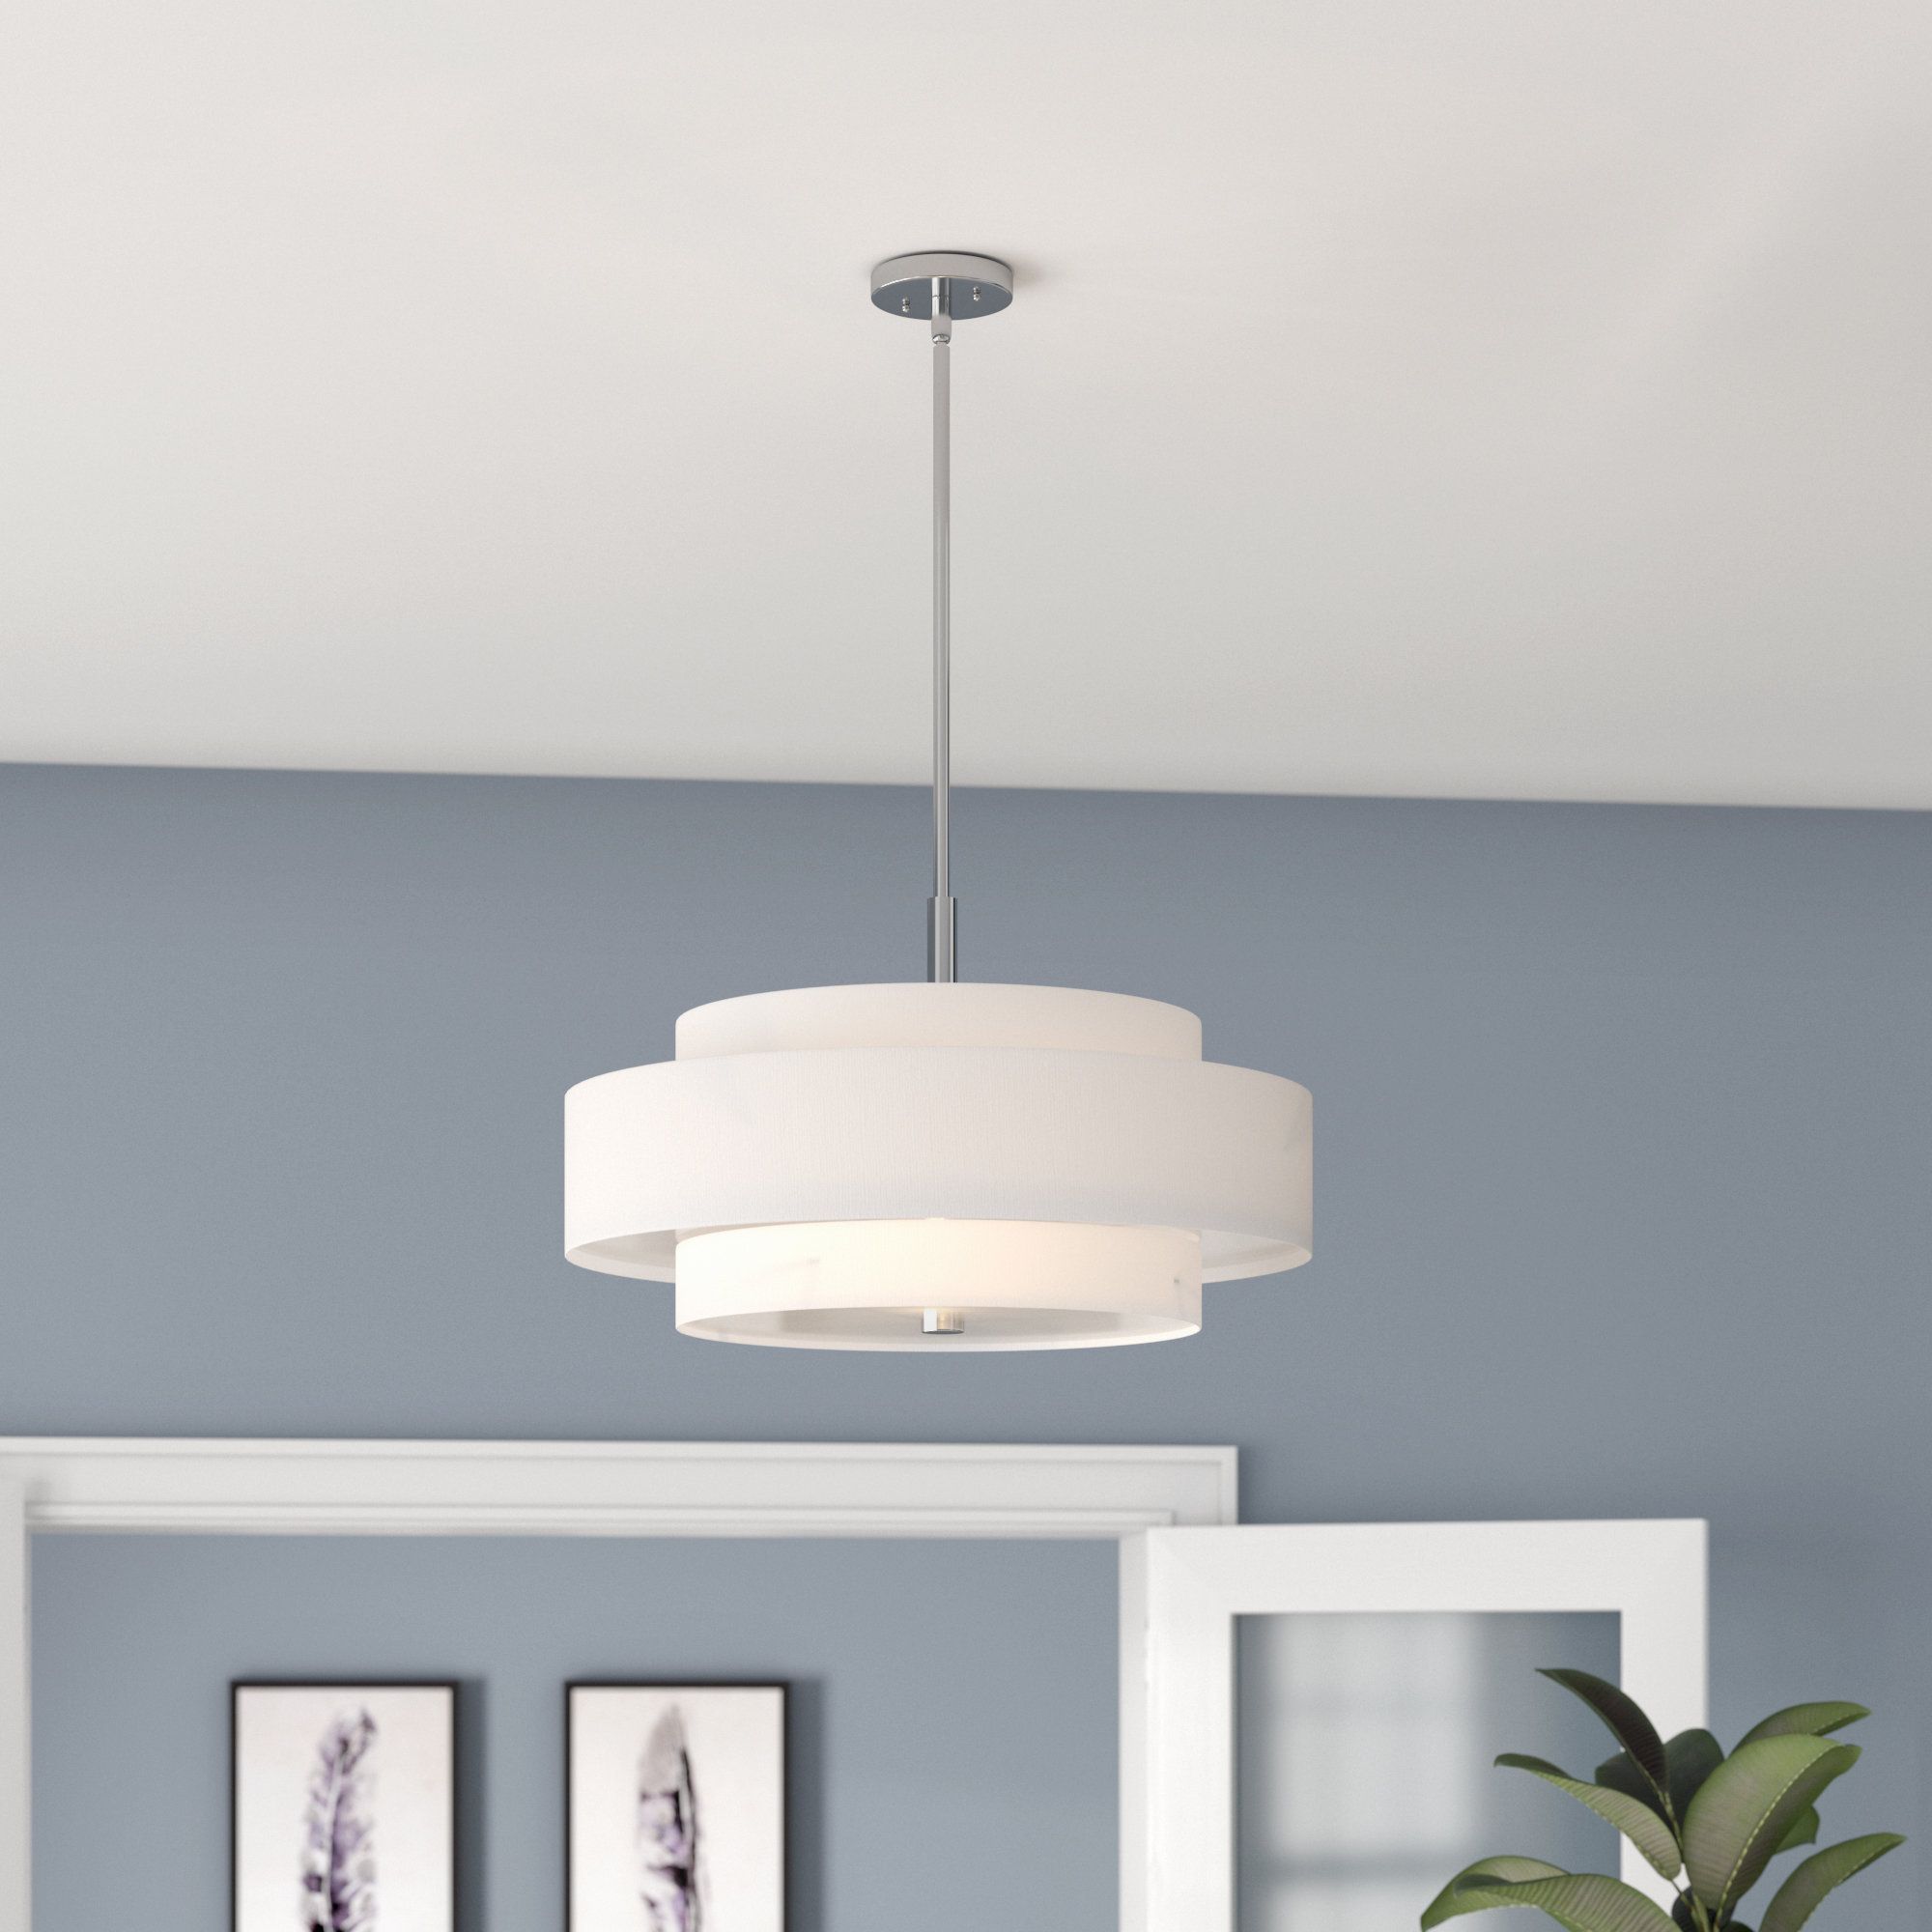 [%Drum Chandeliers Sale – Up To 65% Off Until September 30Th For Well Known Wadlington 5 Light Drum Chandeliers|Wadlington 5 Light Drum Chandeliers Inside Famous Drum Chandeliers Sale – Up To 65% Off Until September 30Th|Fashionable Wadlington 5 Light Drum Chandeliers Throughout Drum Chandeliers Sale – Up To 65% Off Until September 30Th|Most Up To Date Drum Chandeliers Sale – Up To 65% Off Until September 30Th For Wadlington 5 Light Drum Chandeliers%] (View 15 of 25)